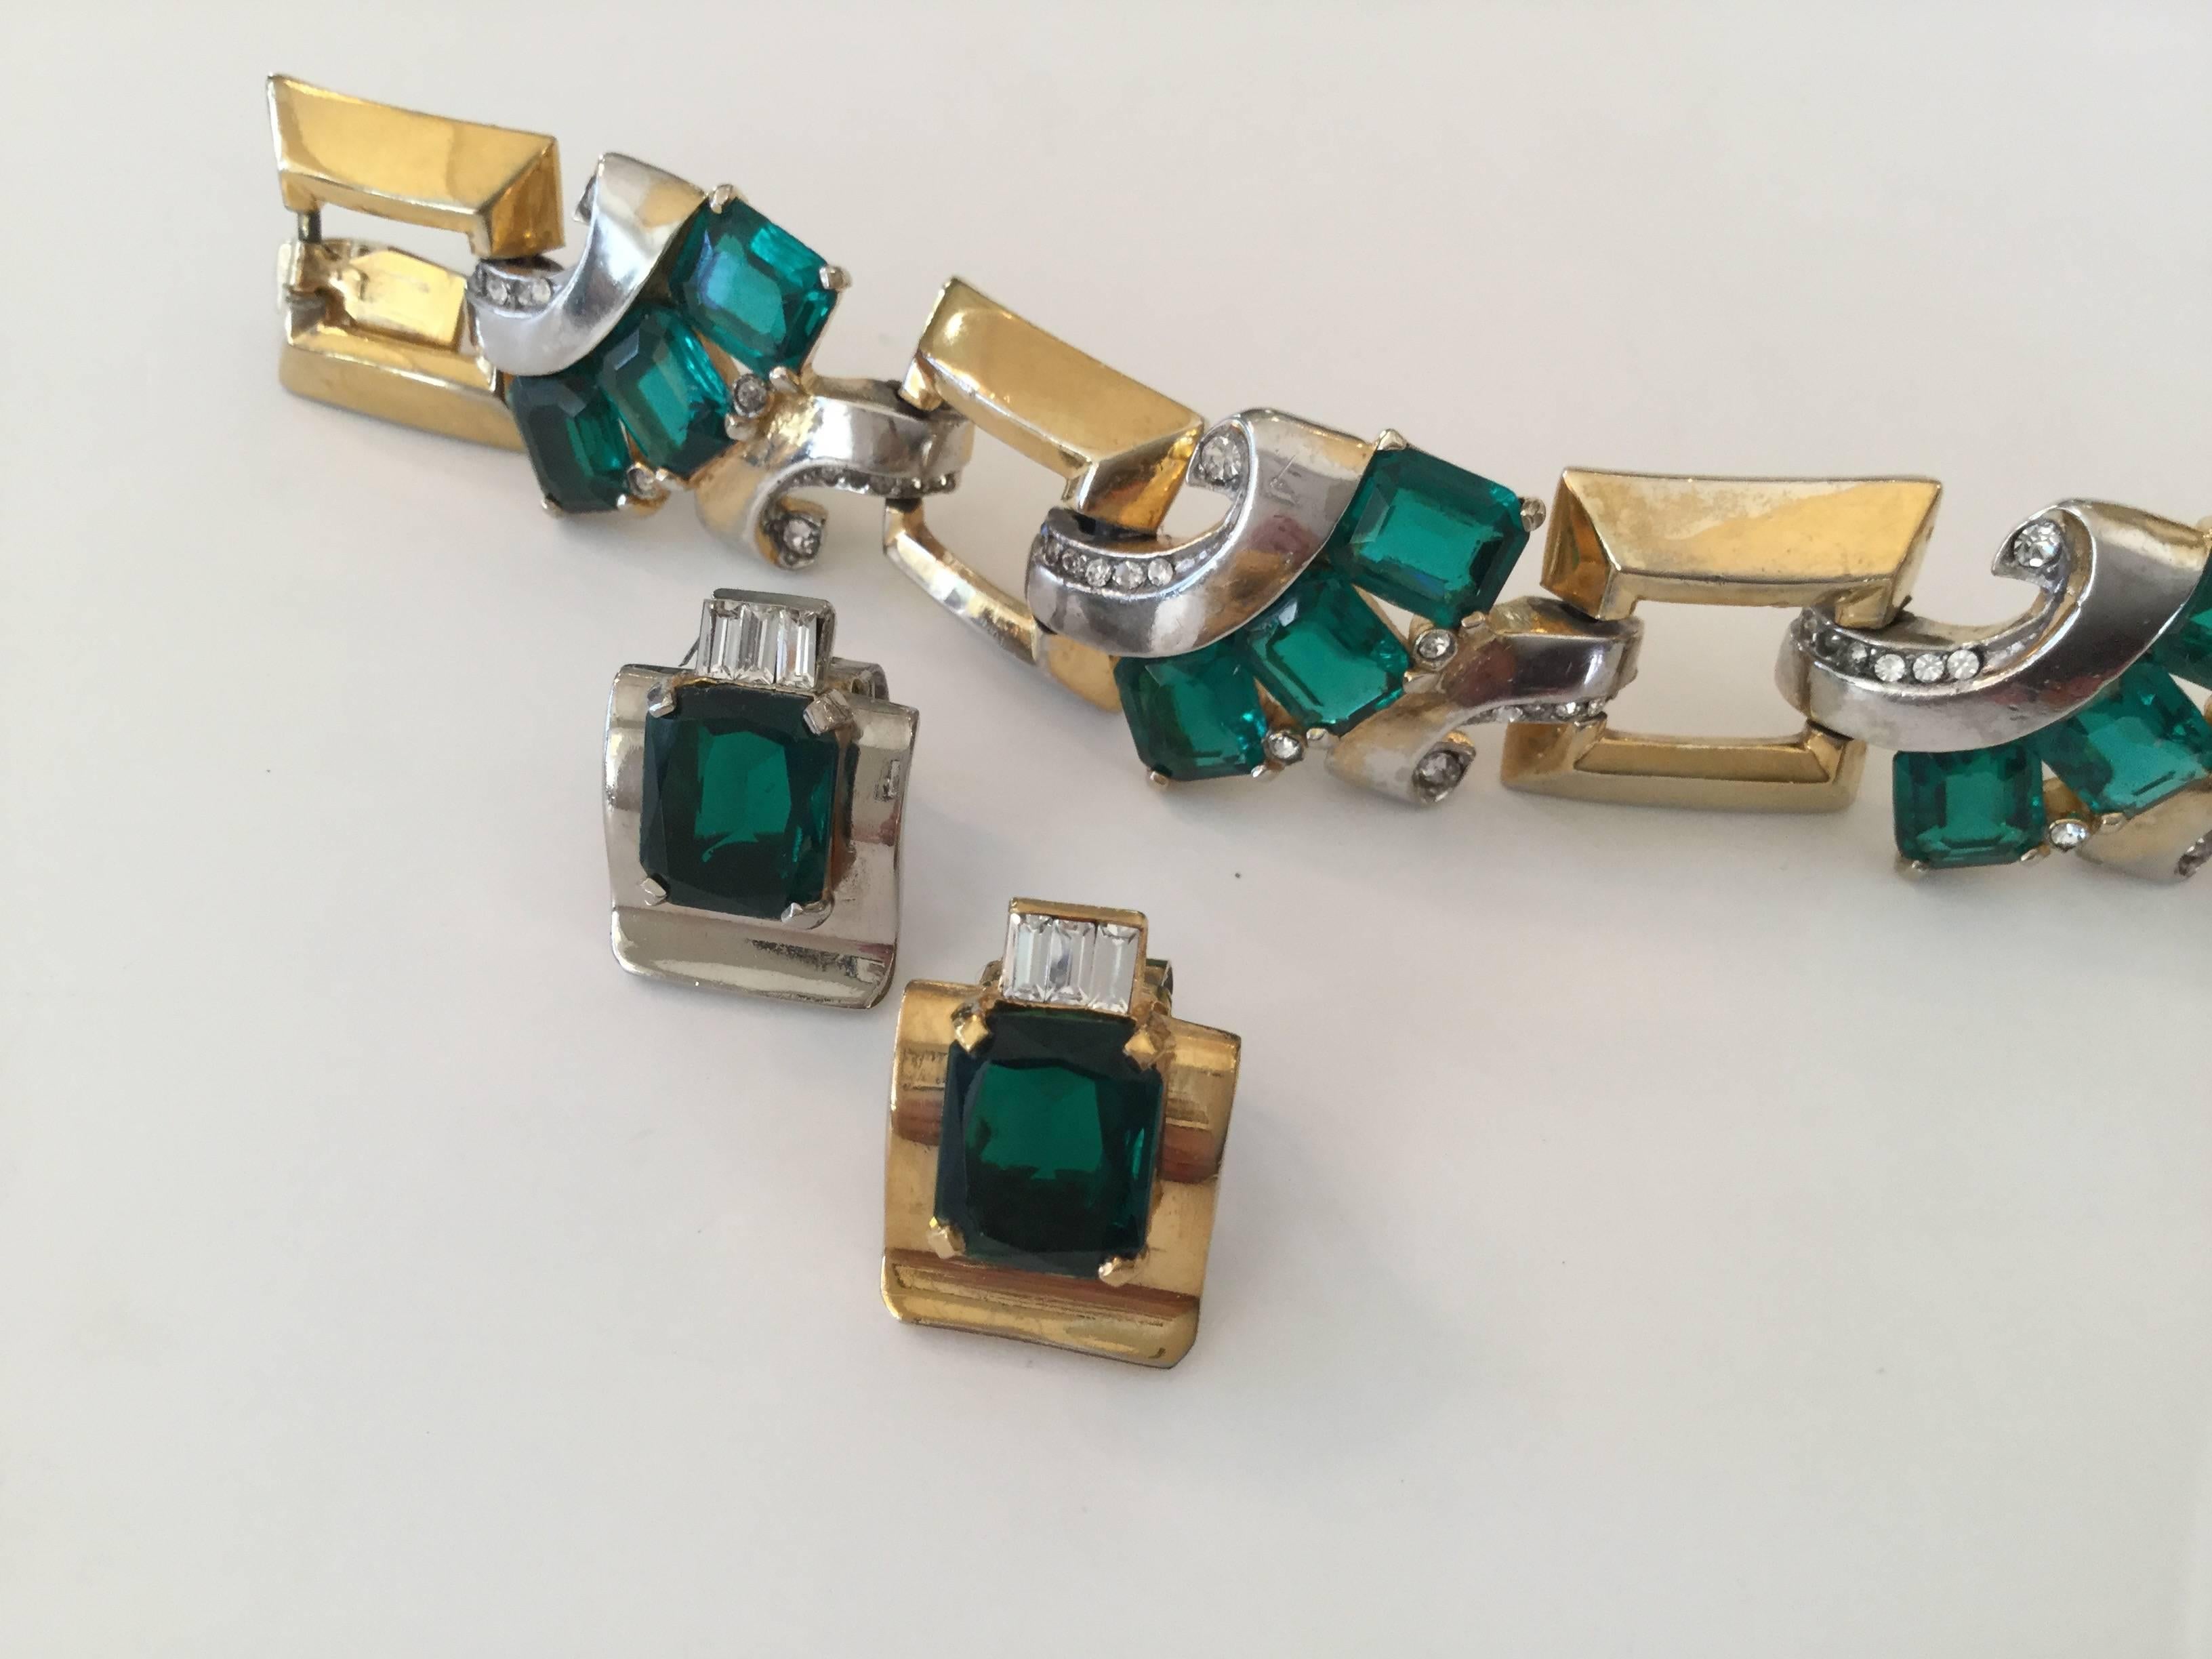 Early Mazer Art Deco emerald green rhinestone bracelet with matching earrings.
Silver and gold plated metal. So clever that the earrings follow this by one being
silver plate and the other being gold plate. Huge emerald paste stones. A bit of